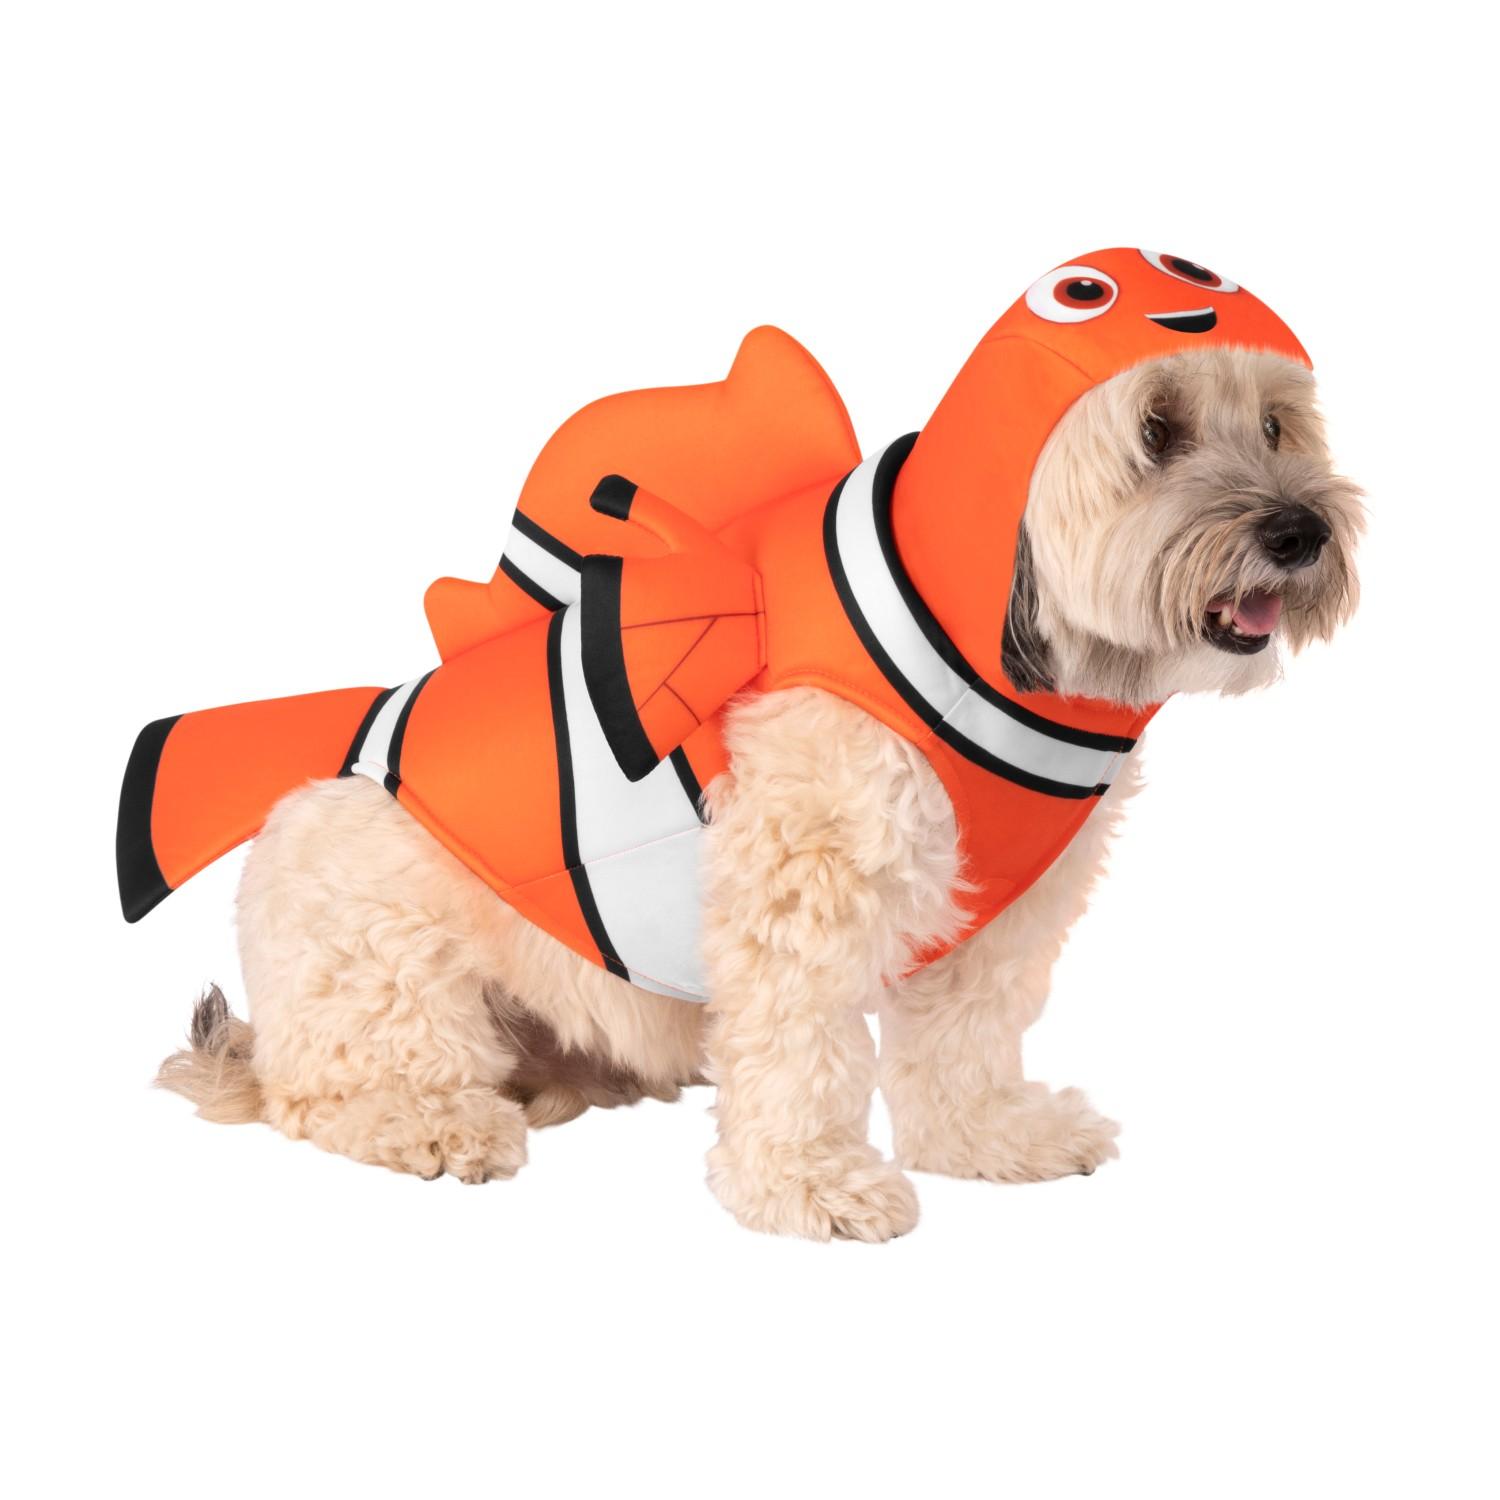 Finding Nemo Dog Costume by Rubies